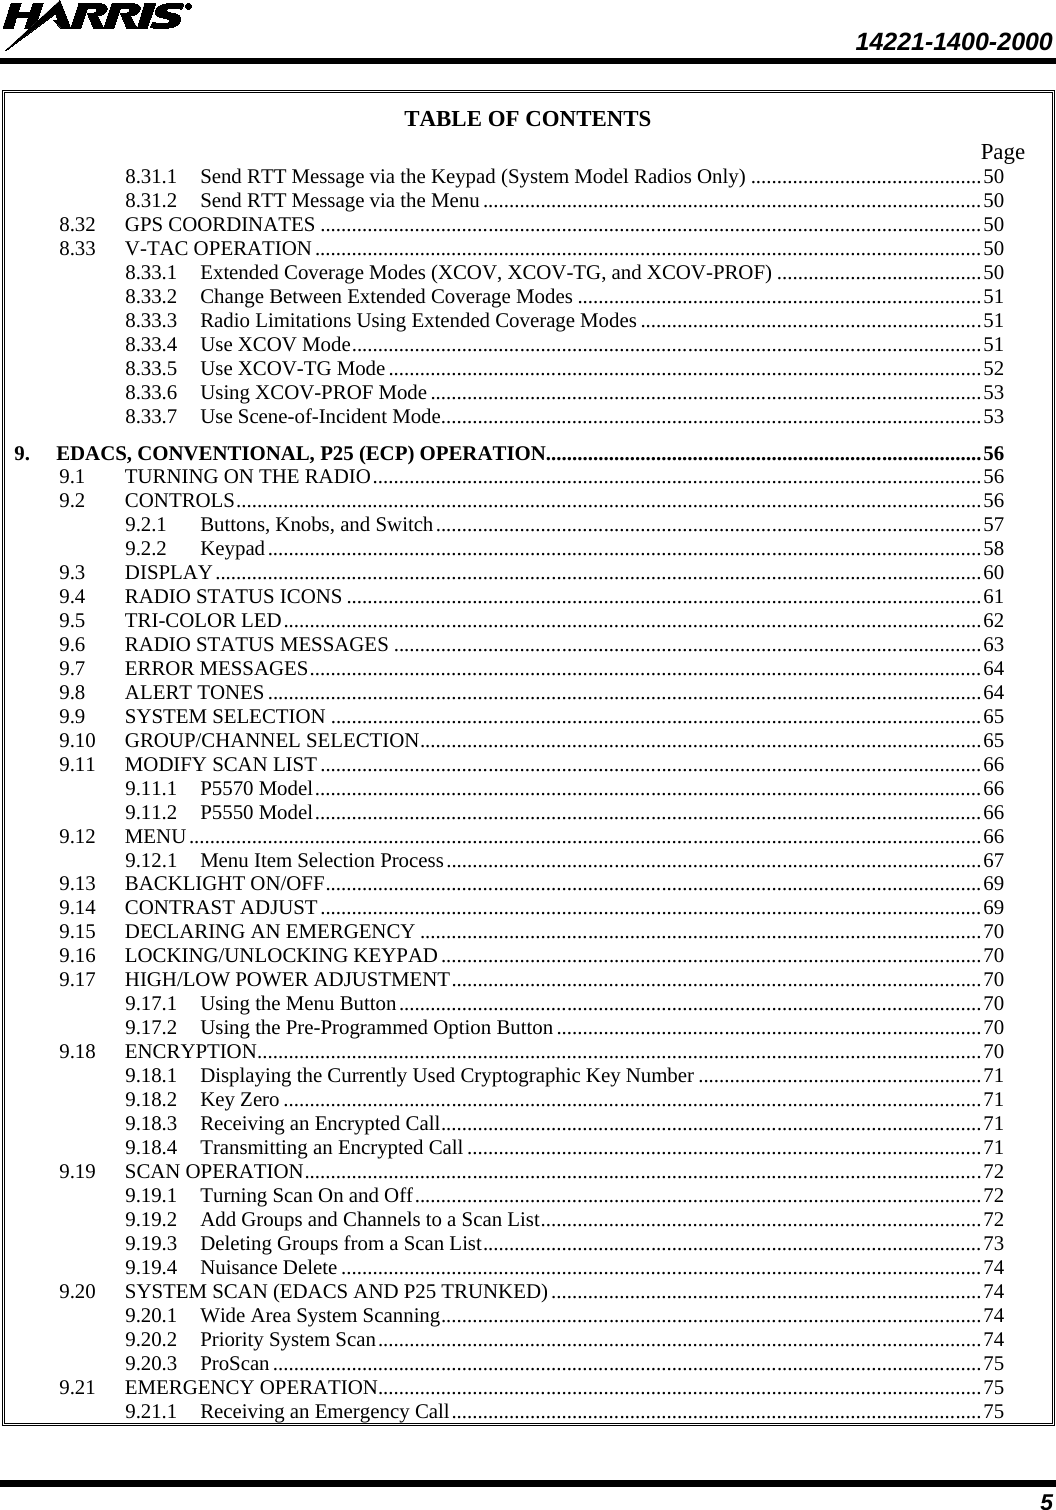  14221-1400-2000  5 TABLE OF CONTENTS Page 8.31.1 Send RTT Message via the Keypad (System Model Radios Only) ............................................ 50 8.31.2 Send RTT Message via the Menu ............................................................................................... 50 8.32 GPS COORDINATES .............................................................................................................................. 50 8.33 V-TAC OPERATION ............................................................................................................................... 50 8.33.1 Extended Coverage Modes (XCOV, XCOV-TG, and XCOV-PROF) ....................................... 50 8.33.2 Change Between Extended Coverage Modes ............................................................................. 51 8.33.3 Radio Limitations Using Extended Coverage Modes ................................................................. 51 8.33.4 Use XCOV Mode ........................................................................................................................ 51 8.33.5 Use XCOV-TG Mode ................................................................................................................. 52 8.33.6 Using XCOV-PROF Mode ......................................................................................................... 53 8.33.7 Use Scene-of-Incident Mode ....................................................................................................... 53 9. EDACS, CONVENTIONAL, P25 (ECP) OPERATION ................................................................................... 56 9.1 TURNING ON THE RADIO .................................................................................................................... 56 9.2 CONTROLS .............................................................................................................................................. 56 9.2.1 Buttons, Knobs, and Switch ........................................................................................................ 57 9.2.2 Keypad ........................................................................................................................................ 58 9.3 DISPLAY .................................................................................................................................................. 60 9.4 RADIO STATUS ICONS ......................................................................................................................... 61 9.5 TRI-COLOR LED ..................................................................................................................................... 62 9.6 RADIO STATUS MESSAGES ................................................................................................................ 63 9.7 ERROR MESSAGES ................................................................................................................................ 64 9.8 ALERT TONES ........................................................................................................................................ 64 9.9 SYSTEM SELECTION ............................................................................................................................ 65 9.10 GROUP/CHANNEL SELECTION ........................................................................................................... 65 9.11 MODIFY SCAN LIST .............................................................................................................................. 66 9.11.1 P5570 Model ............................................................................................................................... 66 9.11.2 P5550 Model ............................................................................................................................... 66 9.12 MENU ....................................................................................................................................................... 66 9.12.1 Menu Item Selection Process ...................................................................................................... 67 9.13 BACKLIGHT ON/OFF ............................................................................................................................. 69 9.14 CONTRAST ADJUST .............................................................................................................................. 69 9.15 DECLARING AN EMERGENCY ........................................................................................................... 70 9.16 LOCKING/UNLOCKING KEYPAD ....................................................................................................... 70 9.17 HIGH/LOW POWER ADJUSTMENT ..................................................................................................... 70 9.17.1 Using the Menu Button ............................................................................................................... 70 9.17.2 Using the Pre-Programmed Option Button ................................................................................. 70 9.18 ENCRYPTION .......................................................................................................................................... 70 9.18.1 Displaying the Currently Used Cryptographic Key Number ...................................................... 71 9.18.2 Key Zero ..................................................................................................................................... 71 9.18.3 Receiving an Encrypted Call ....................................................................................................... 71 9.18.4 Transmitting an Encrypted Call .................................................................................................. 71 9.19 SCAN OPERATION ................................................................................................................................. 72 9.19.1 Turning Scan On and Off ............................................................................................................ 72 9.19.2 Add Groups and Channels to a Scan List .................................................................................... 72 9.19.3 Deleting Groups from a Scan List ............................................................................................... 73 9.19.4 Nuisance Delete .......................................................................................................................... 74 9.20 SYSTEM SCAN (EDACS AND P25 TRUNKED) .................................................................................. 74 9.20.1 Wide Area System Scanning ....................................................................................................... 74 9.20.2 Priority System Scan ................................................................................................................... 74 9.20.3 ProScan ....................................................................................................................................... 75 9.21 EMERGENCY OPERATION ................................................................................................................... 75 9.21.1 Receiving an Emergency Call ..................................................................................................... 75 